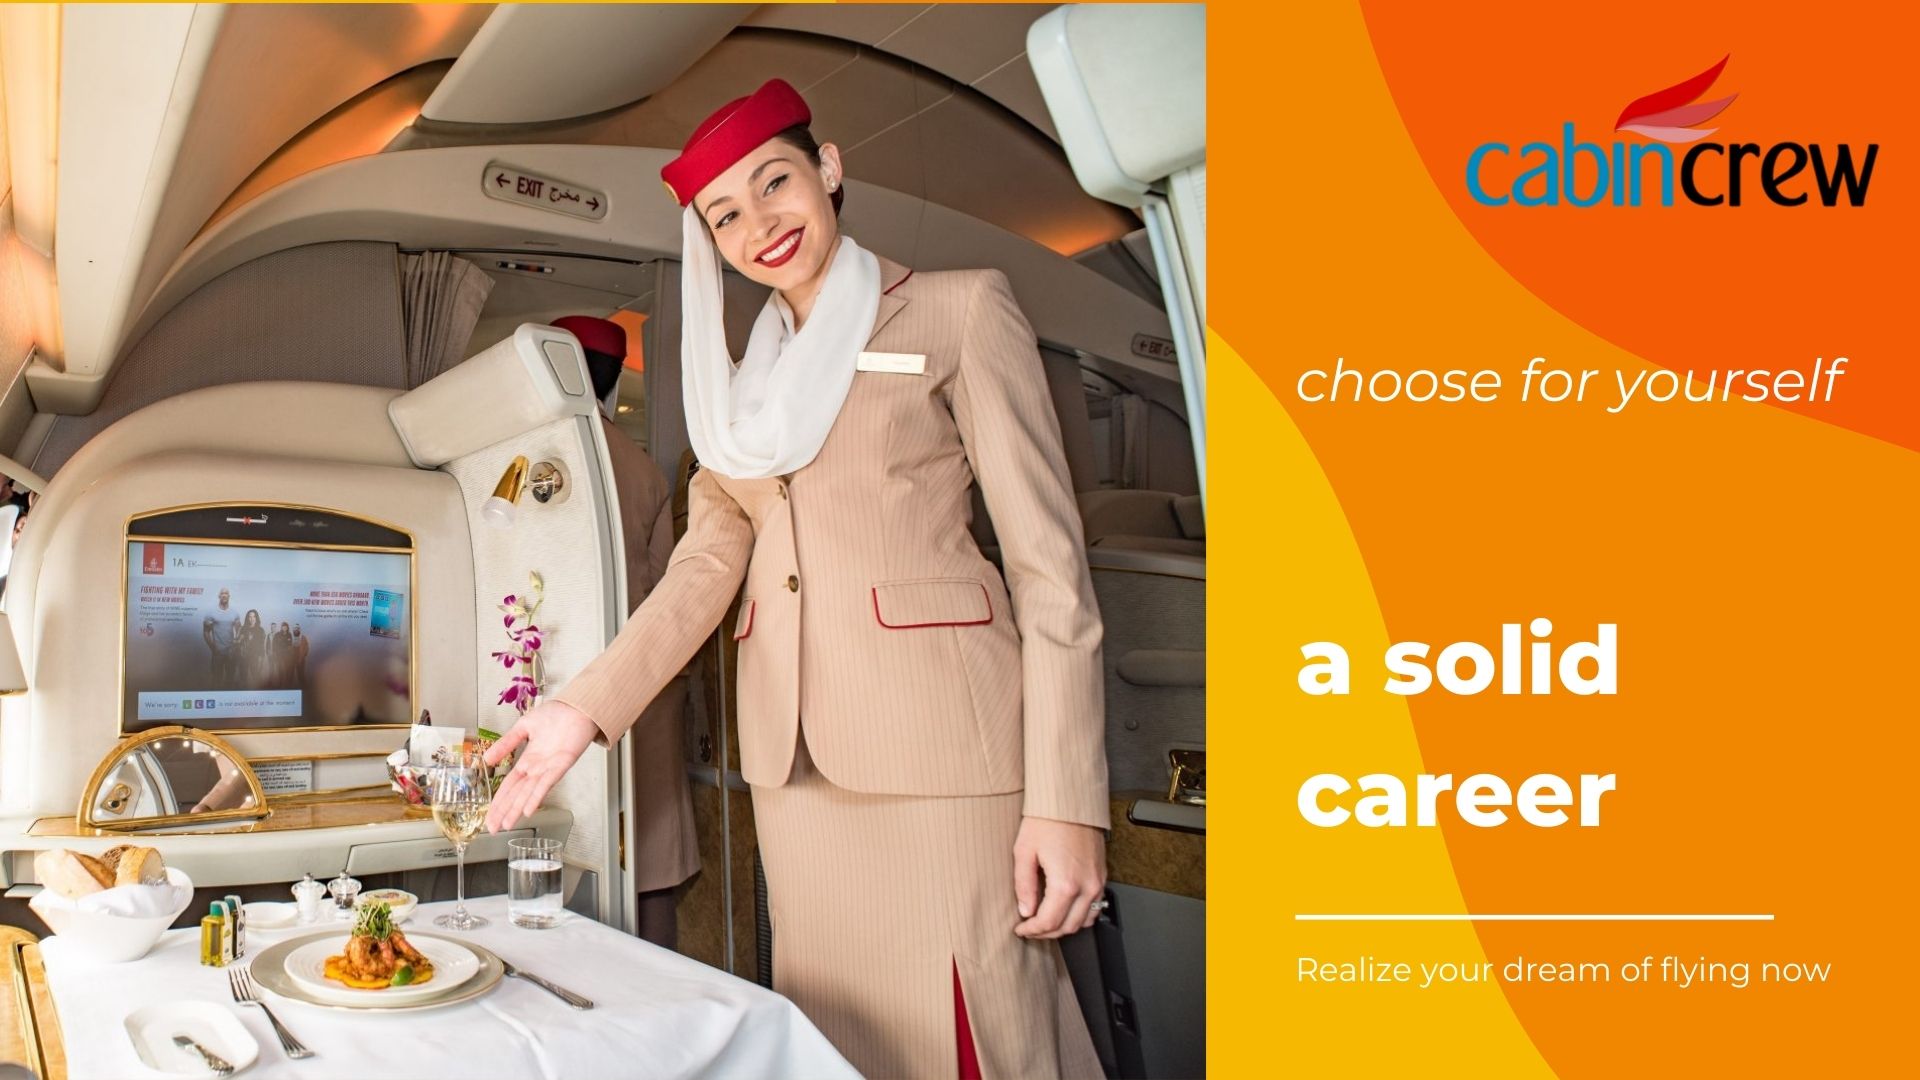 Grooming secrets when interviewing Emirates Airlines cabin crew - Cabin Crew  WIKI